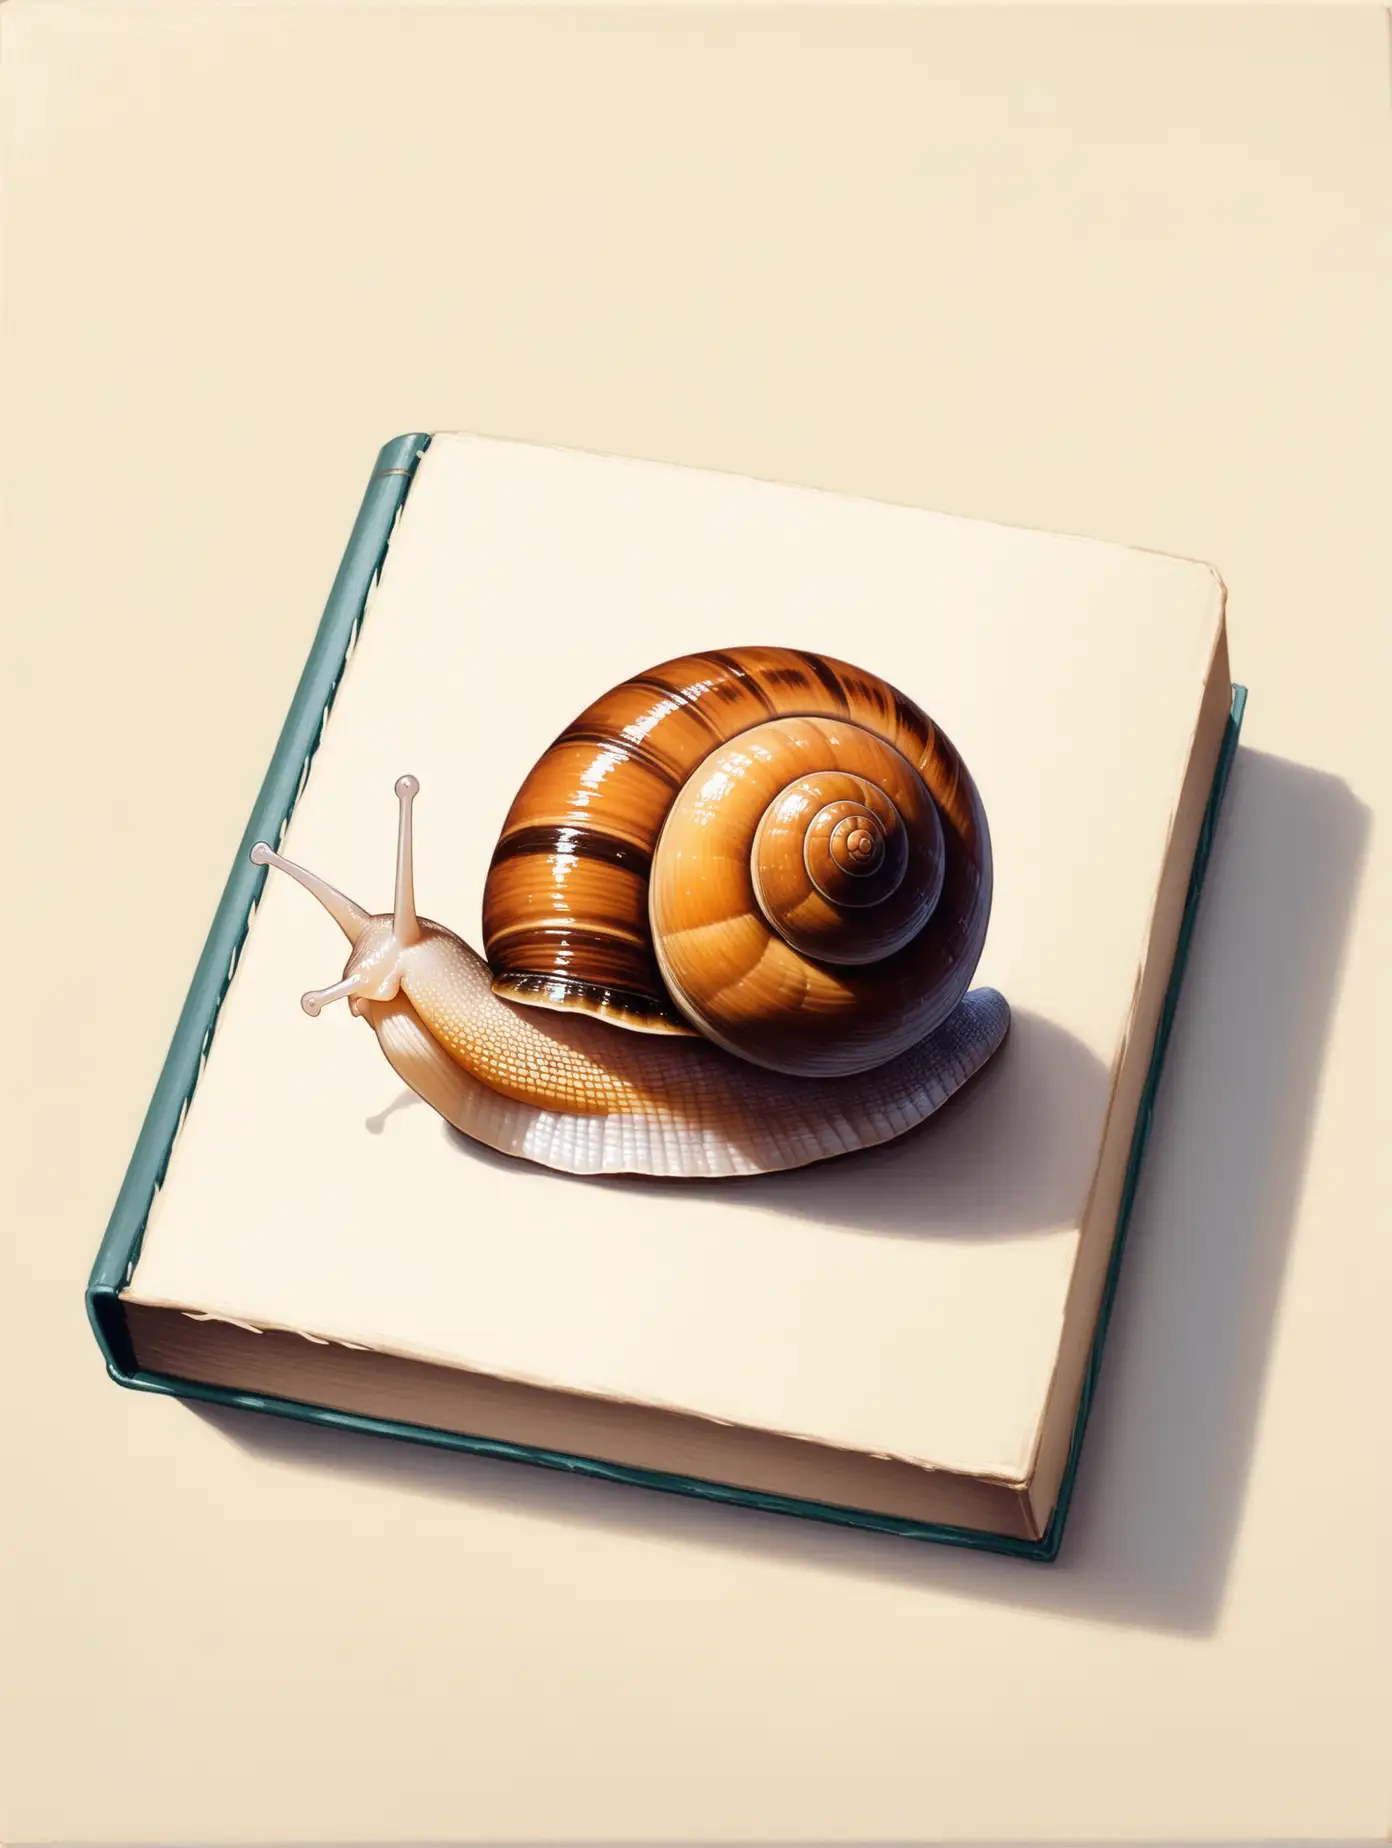 Modern Book with Snail Painting Whimsical Artwork Depicting a Snail on a Closed Book